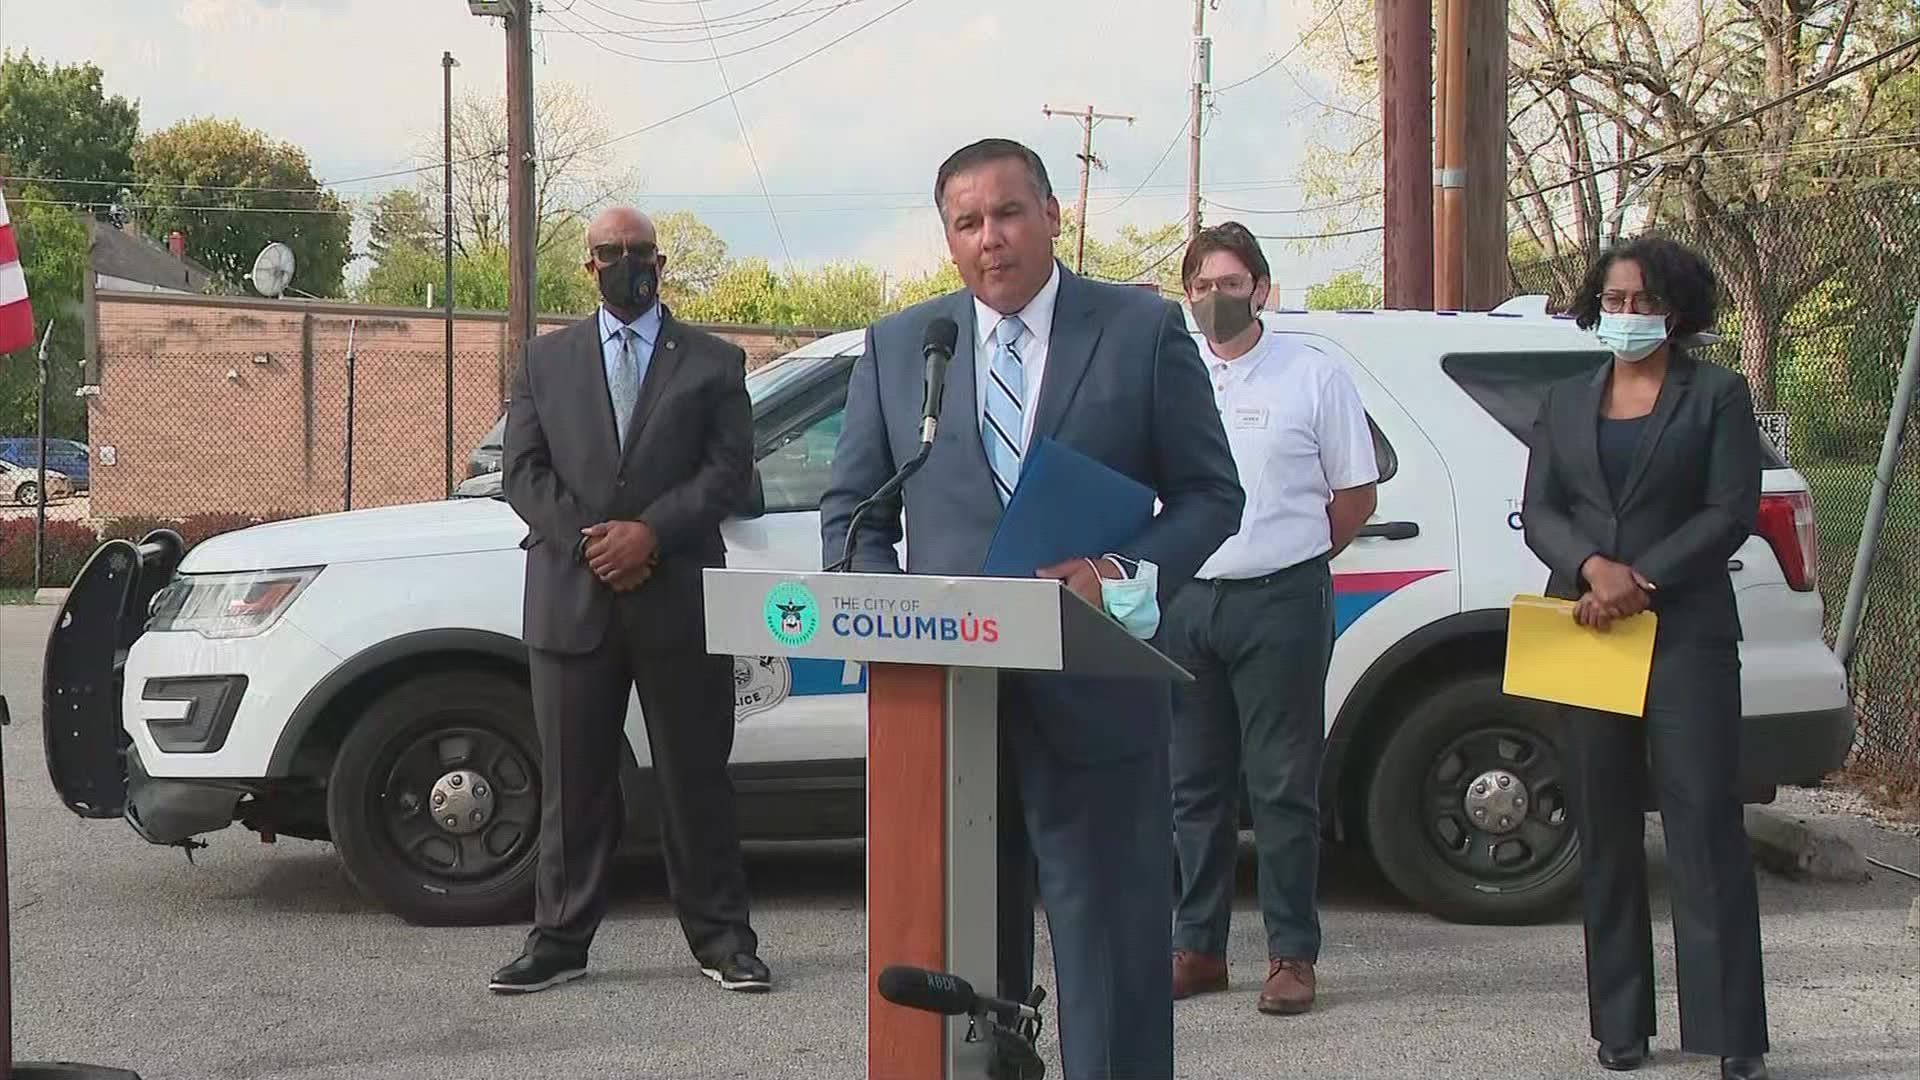 The announcement comes as part of a continued effort to boost safety throughout Columbus.